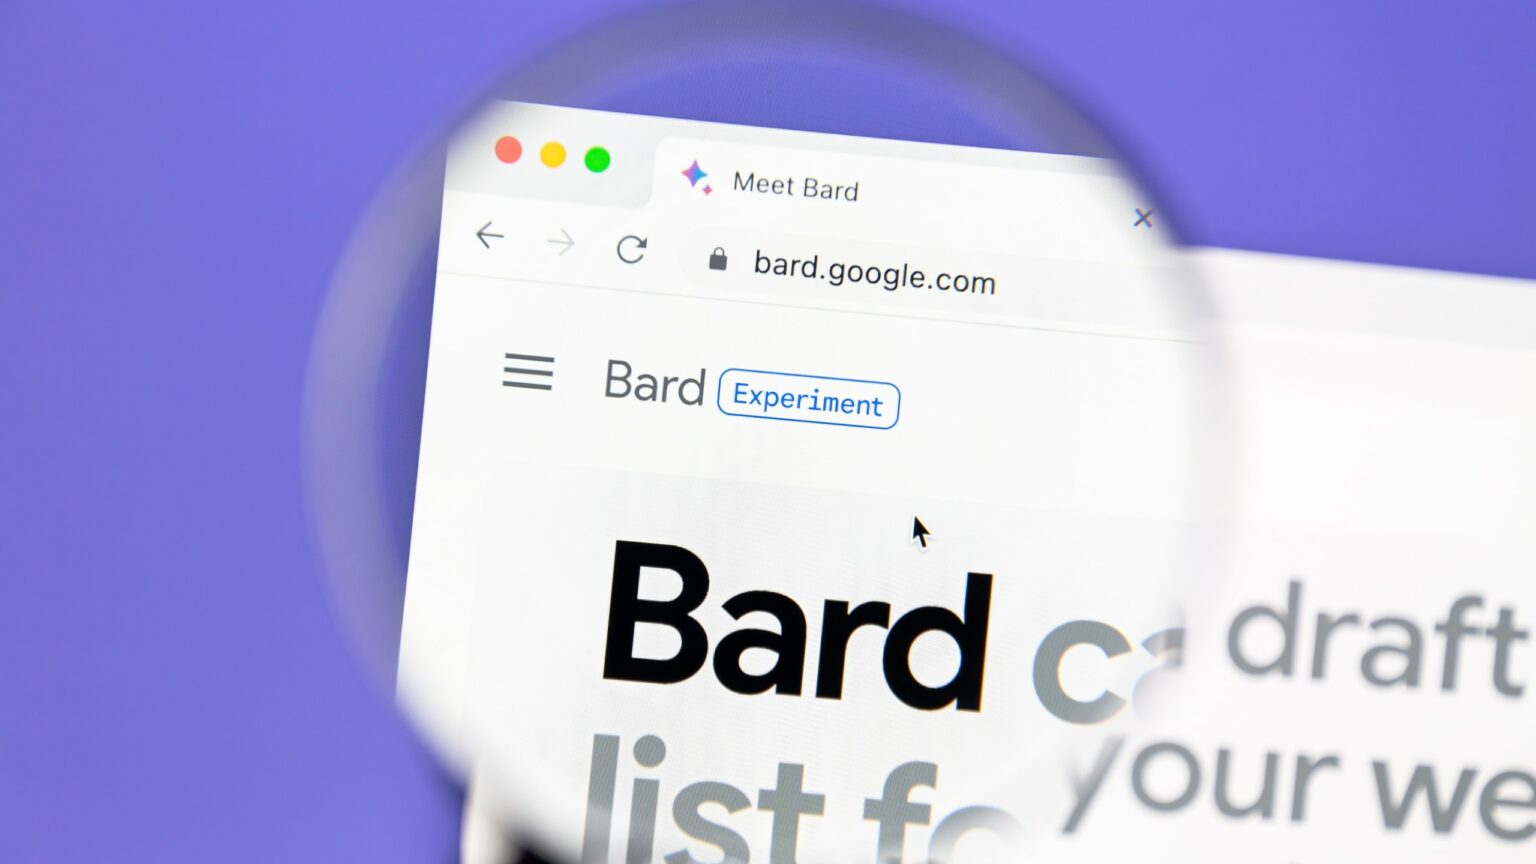 Google's Bard AI Chatbot Now Reads Images and Speaks, Expands to EU